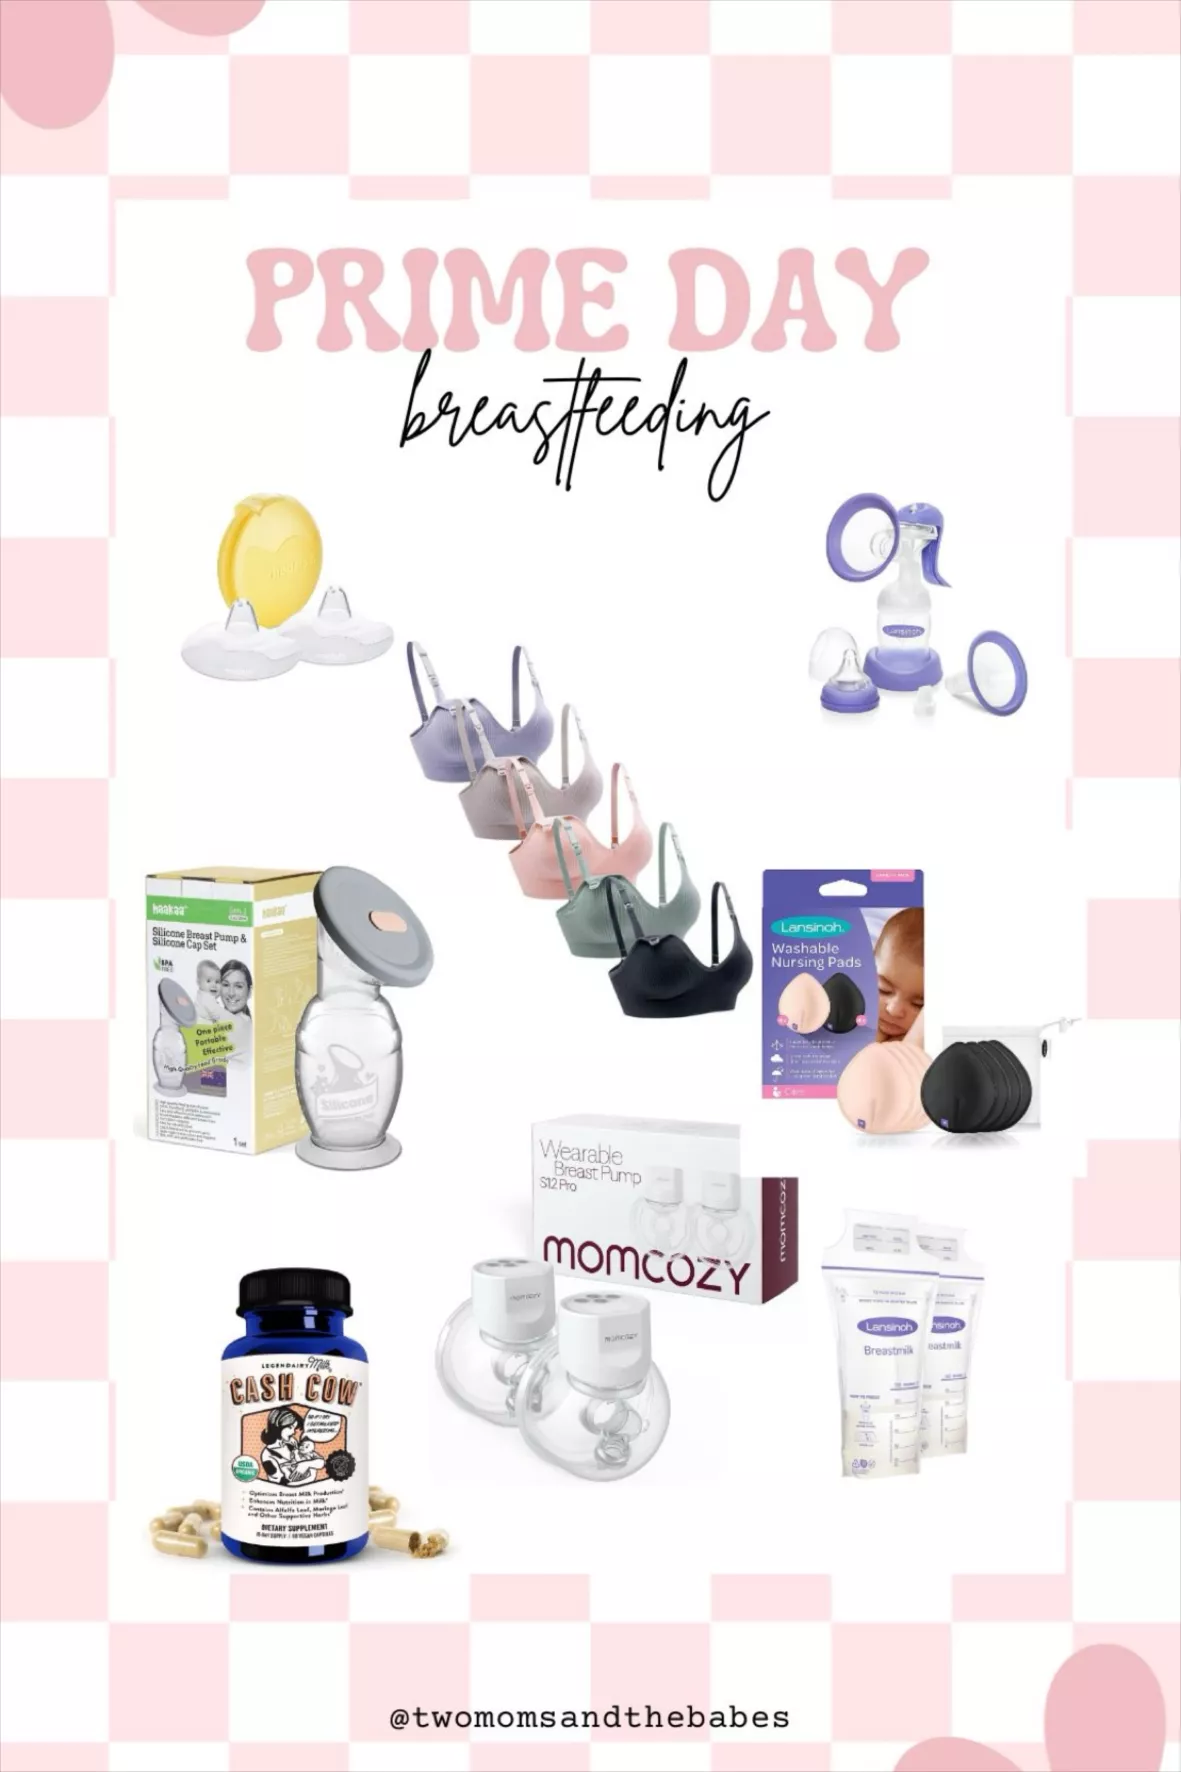 Momcozy S12 Pro Hands-Free Breast … curated on LTK